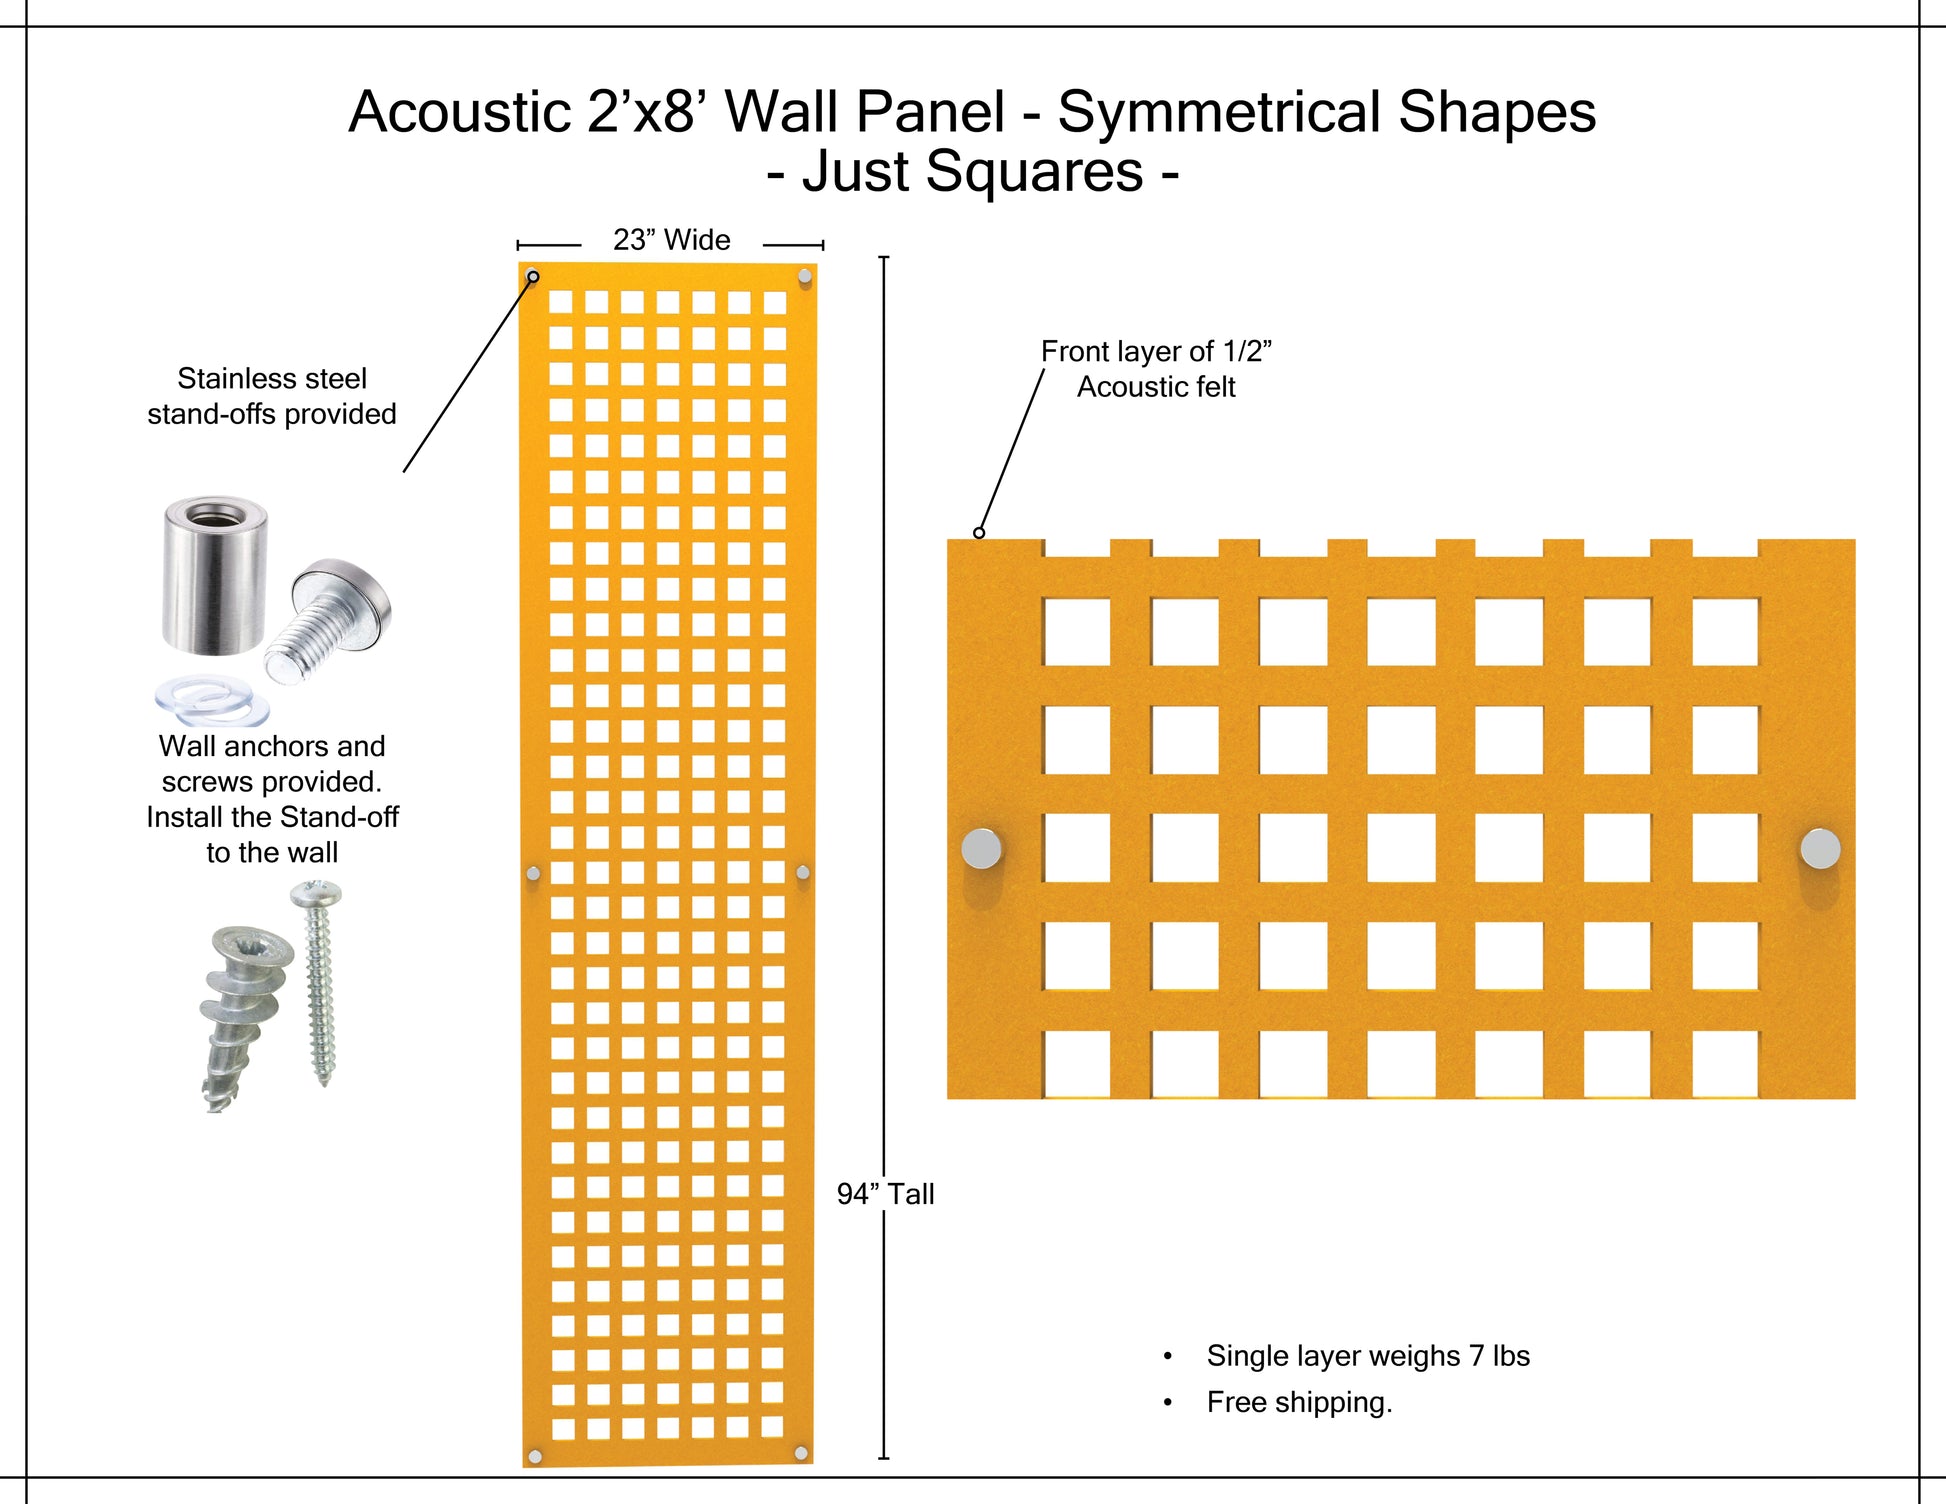 Acoustic Wall Panel 2x8 Just Squares